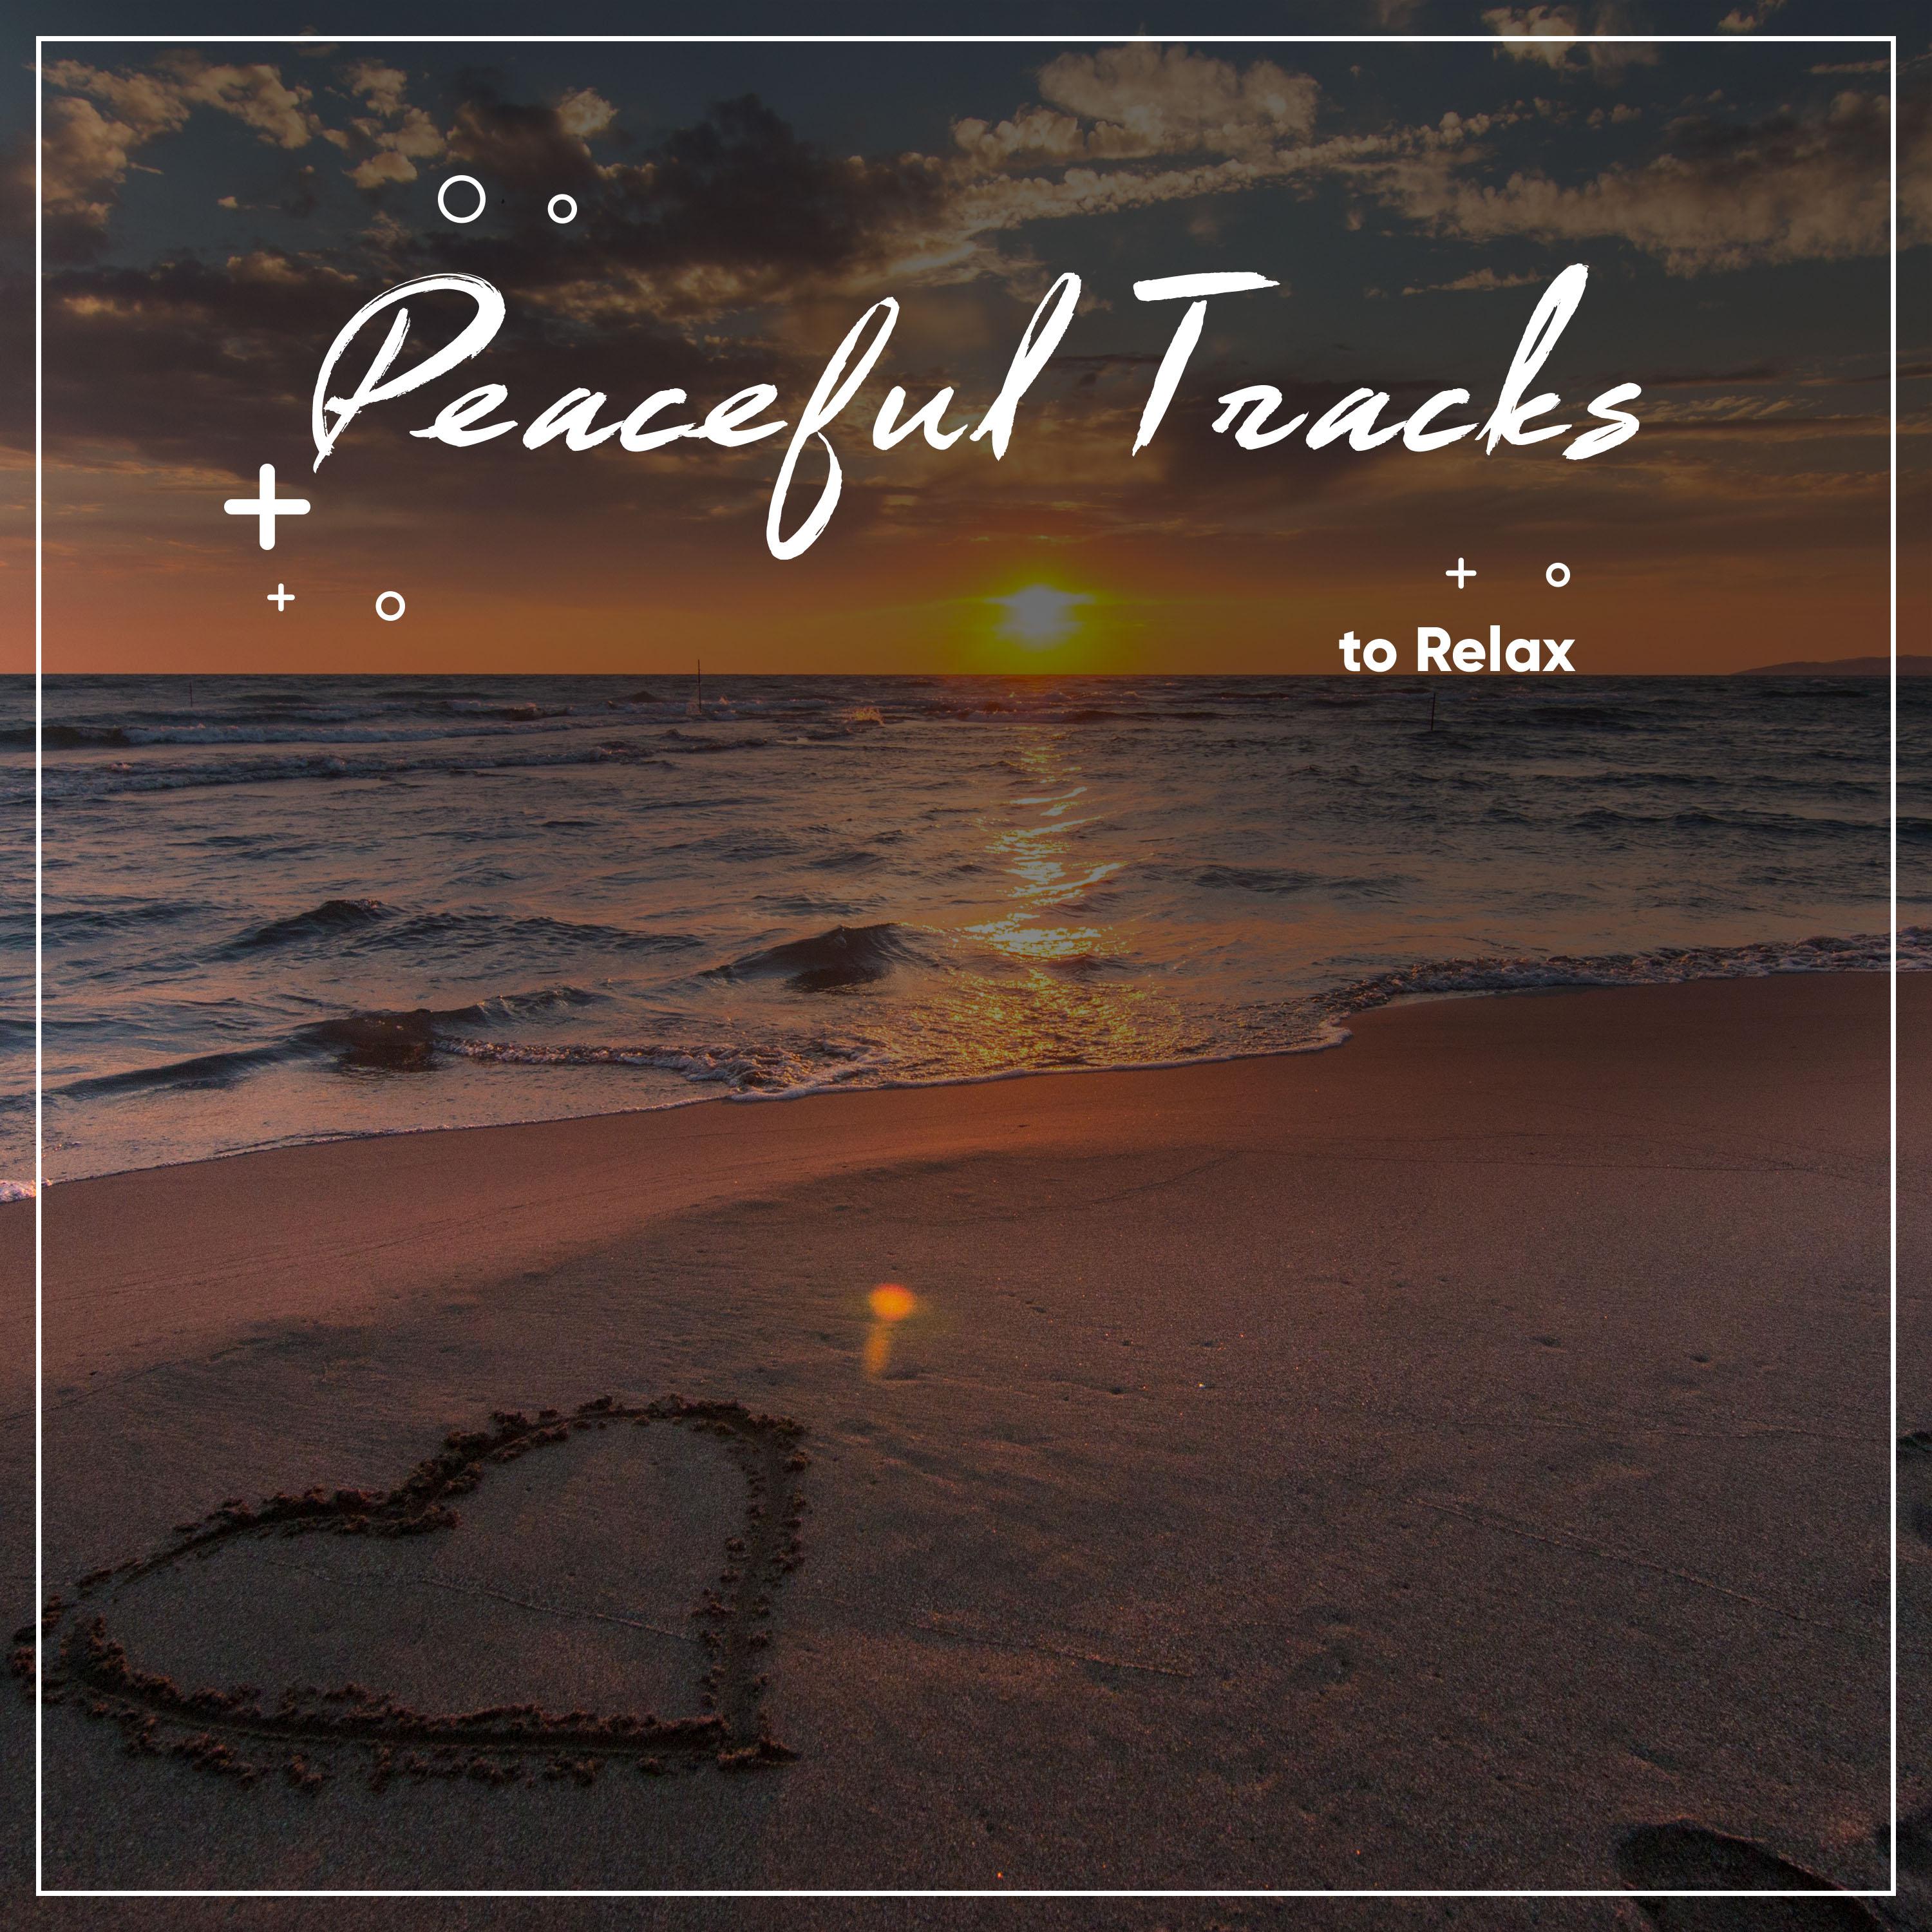 #18 Peaceful Tracks to Relax